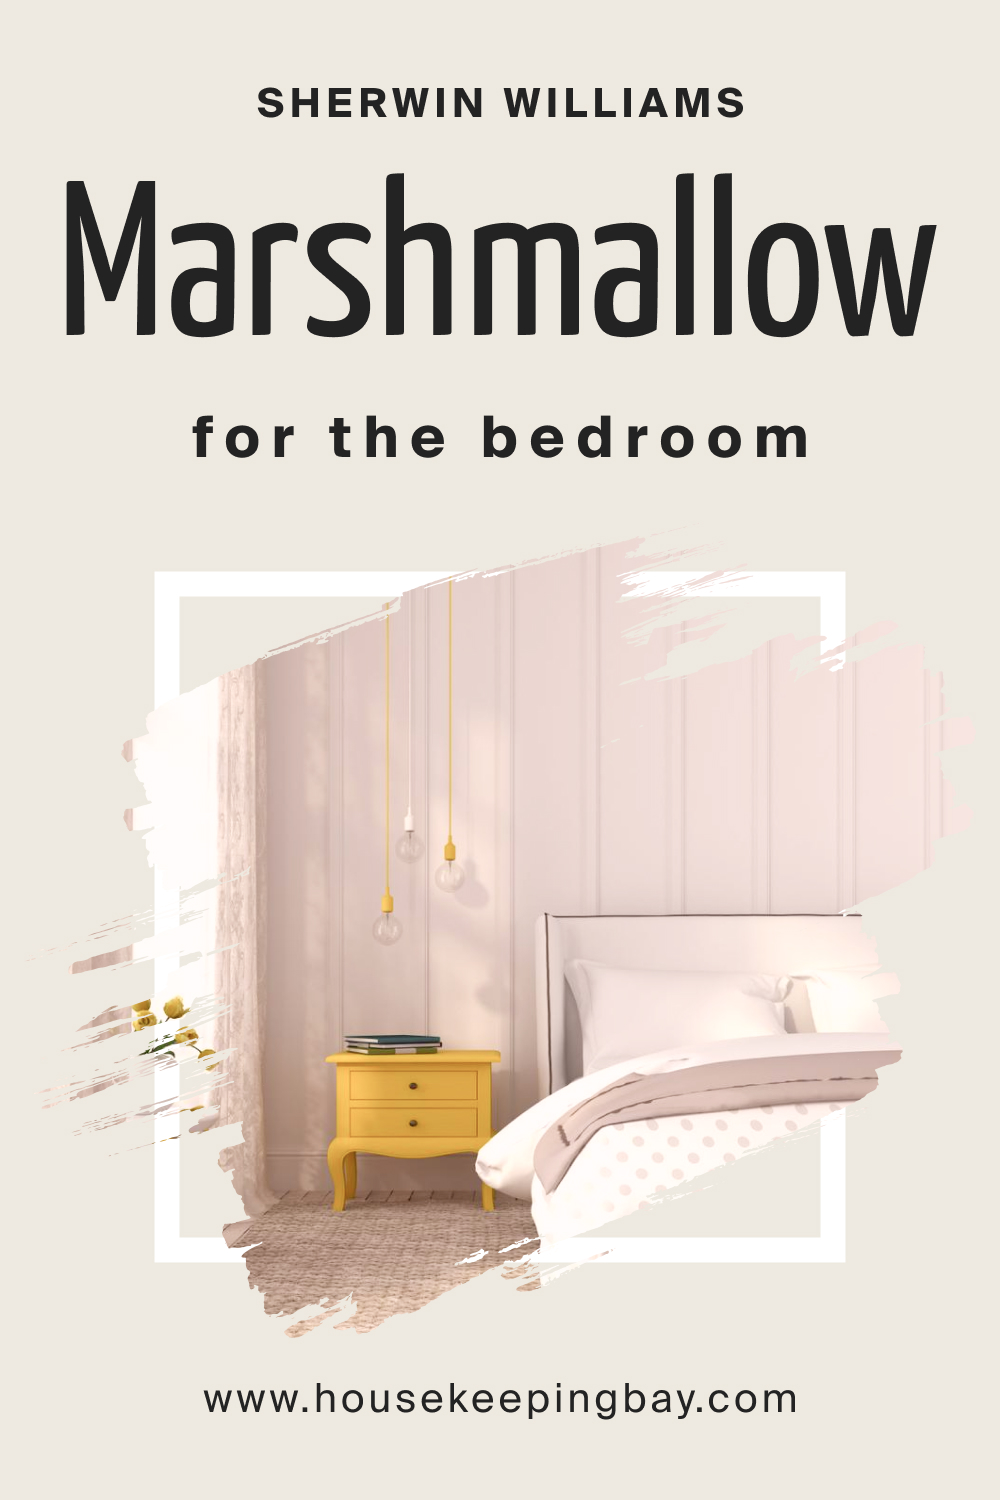 Sherwin Williams. SW Marshmallow For the bedroom